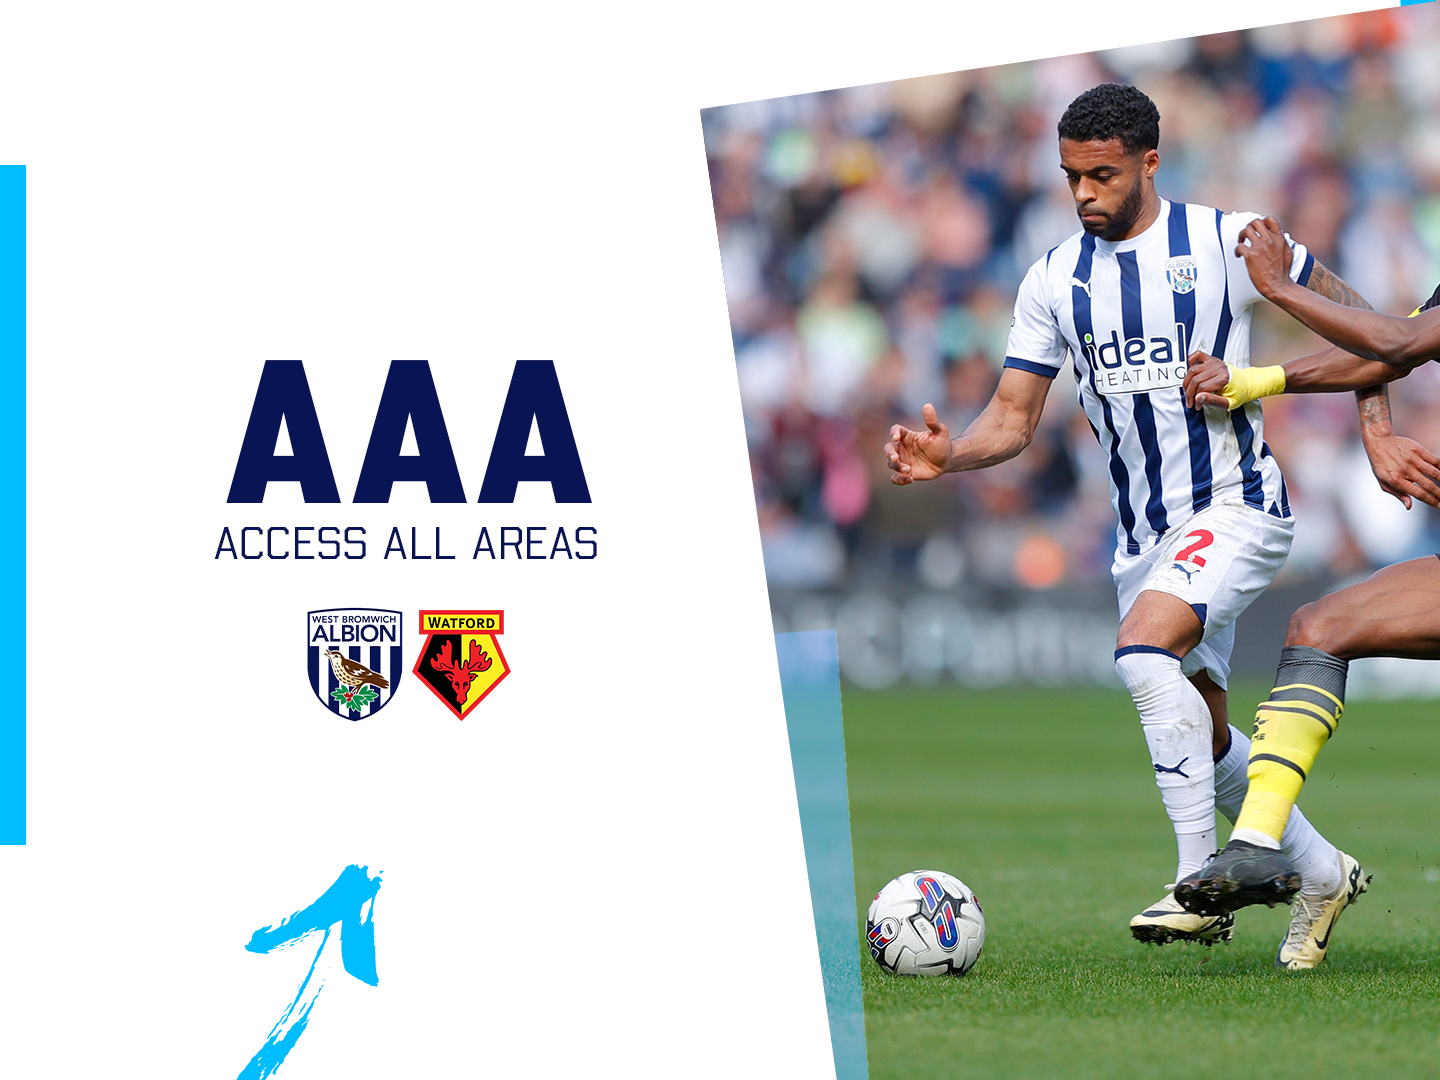 An Access All Areas Matchday graphic, showing a photo of Darnell Furlong, along with the club crests of Albion and Watford